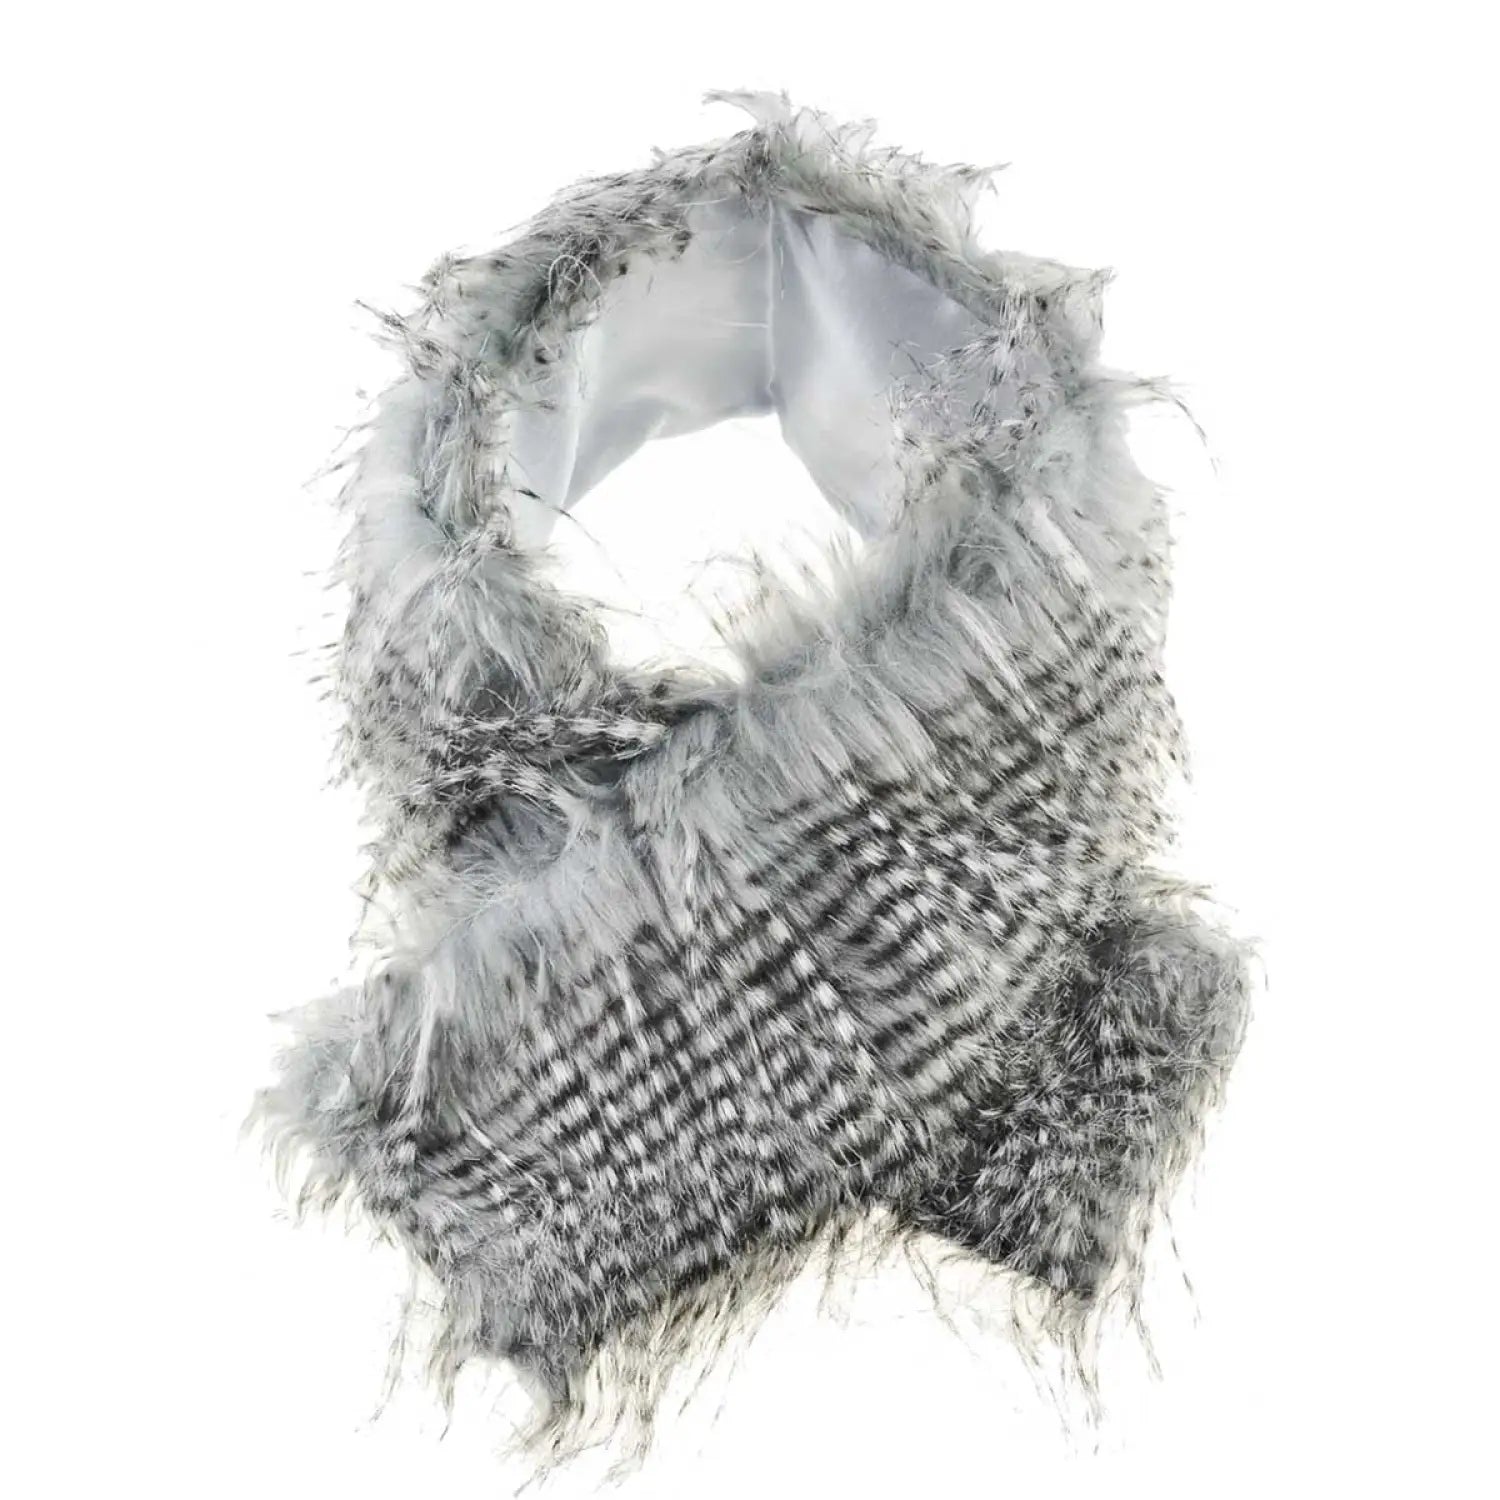 Luxurious Faux Fur Autumn Winter Snood Scarf - White and Black Feathered Pattern